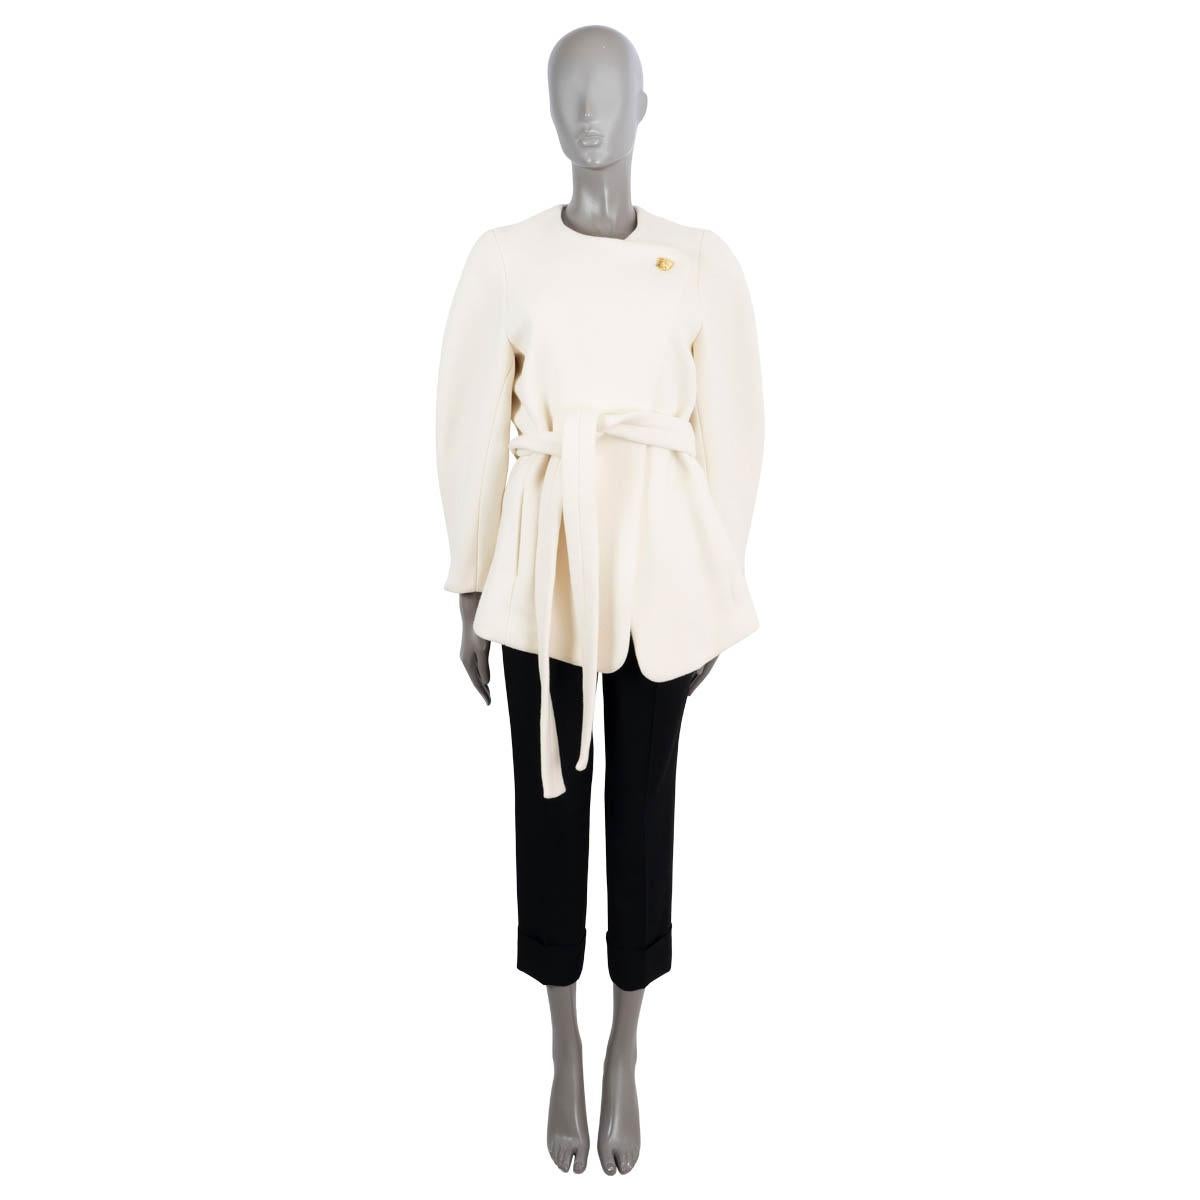 100% authentic Chloé asymmetric self-tie belted jacket in ivory wool (80%) and polyamide (20%). The design features a structured gold-tone metal button, two side slit pockets, a loose fit and oversized 3/4 sleeves. Brand new with tags. 

2023